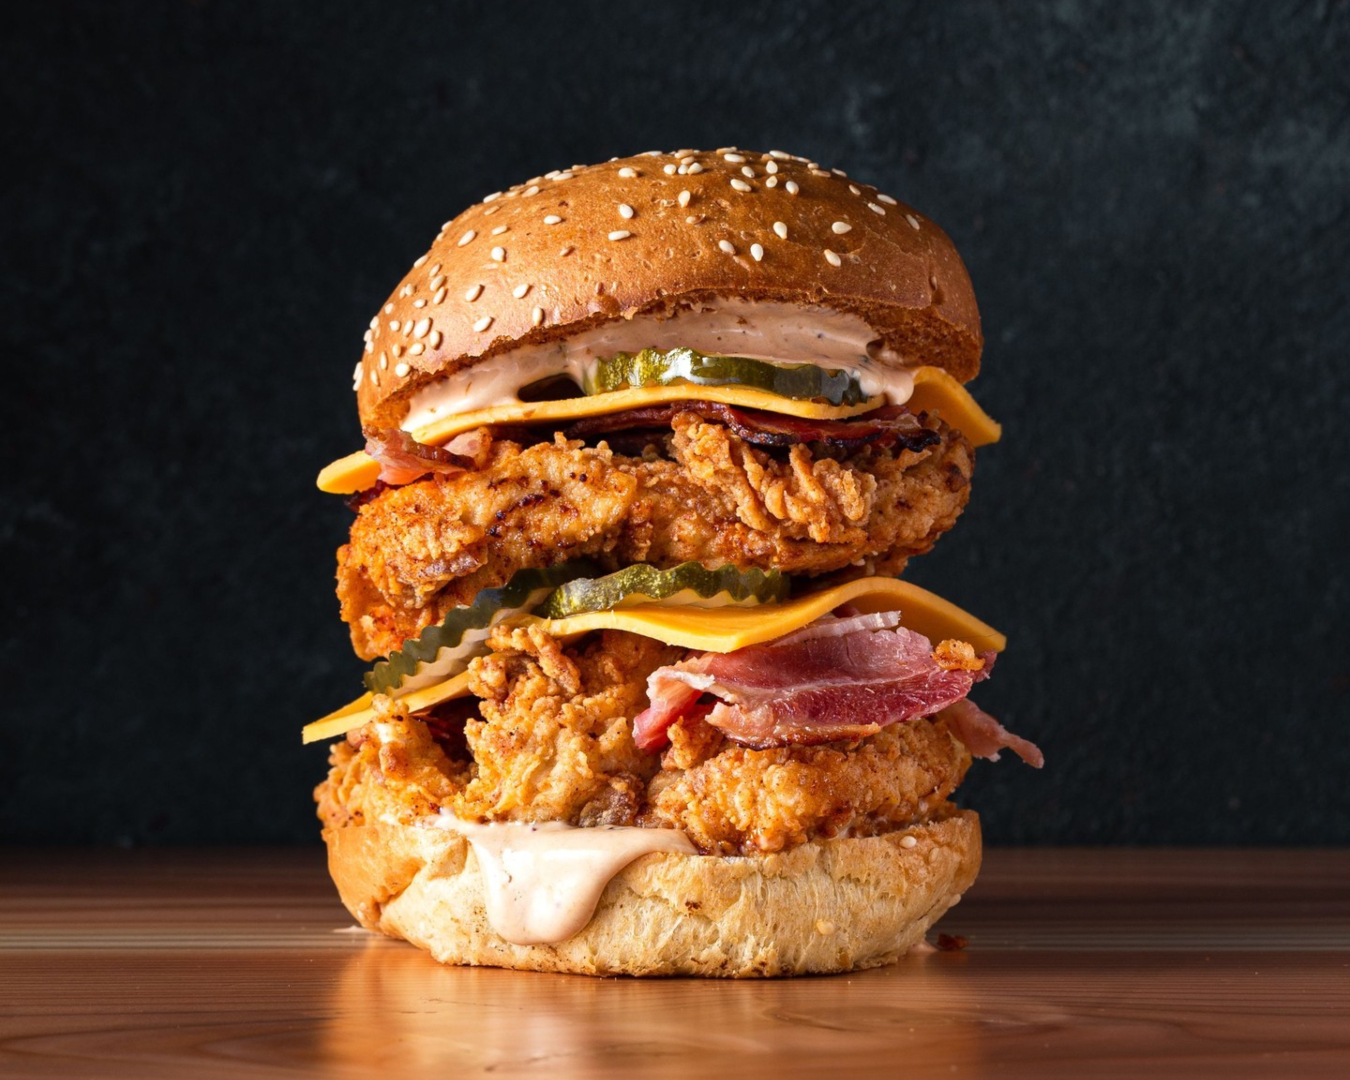 A crispy fried chicken burger from Empire Chicken is stacked high with cheese, pickles, and bacon